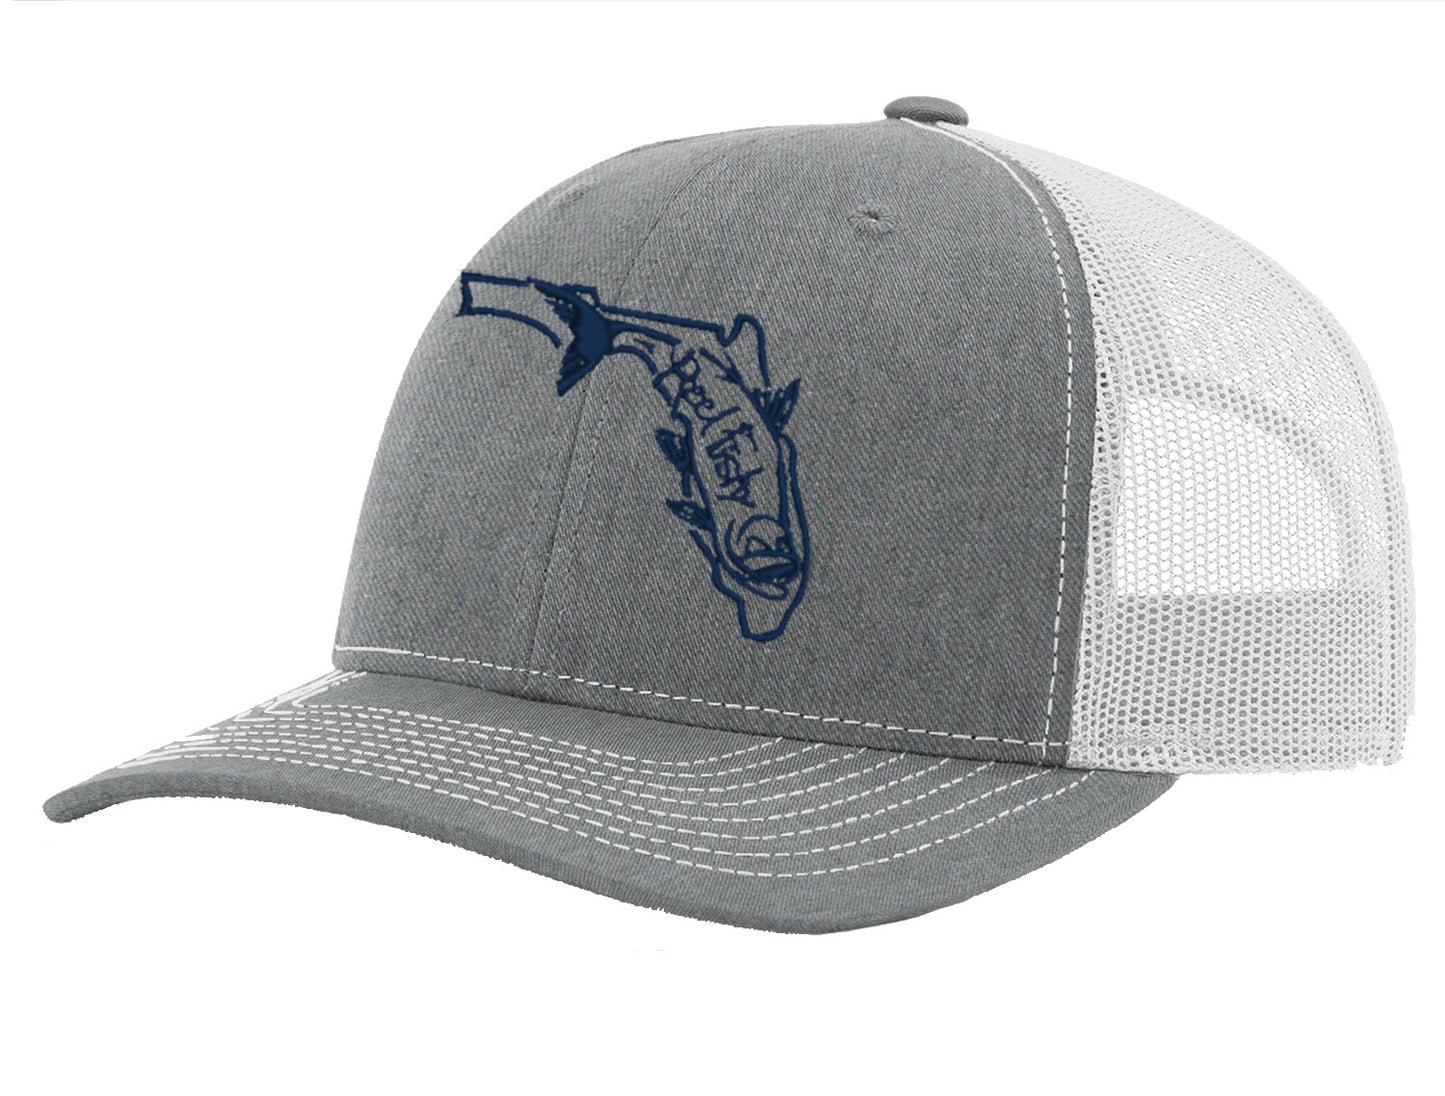 Tarpon and State of Florida Logo Fishing Structured Trucker Hats - *28 Colors!